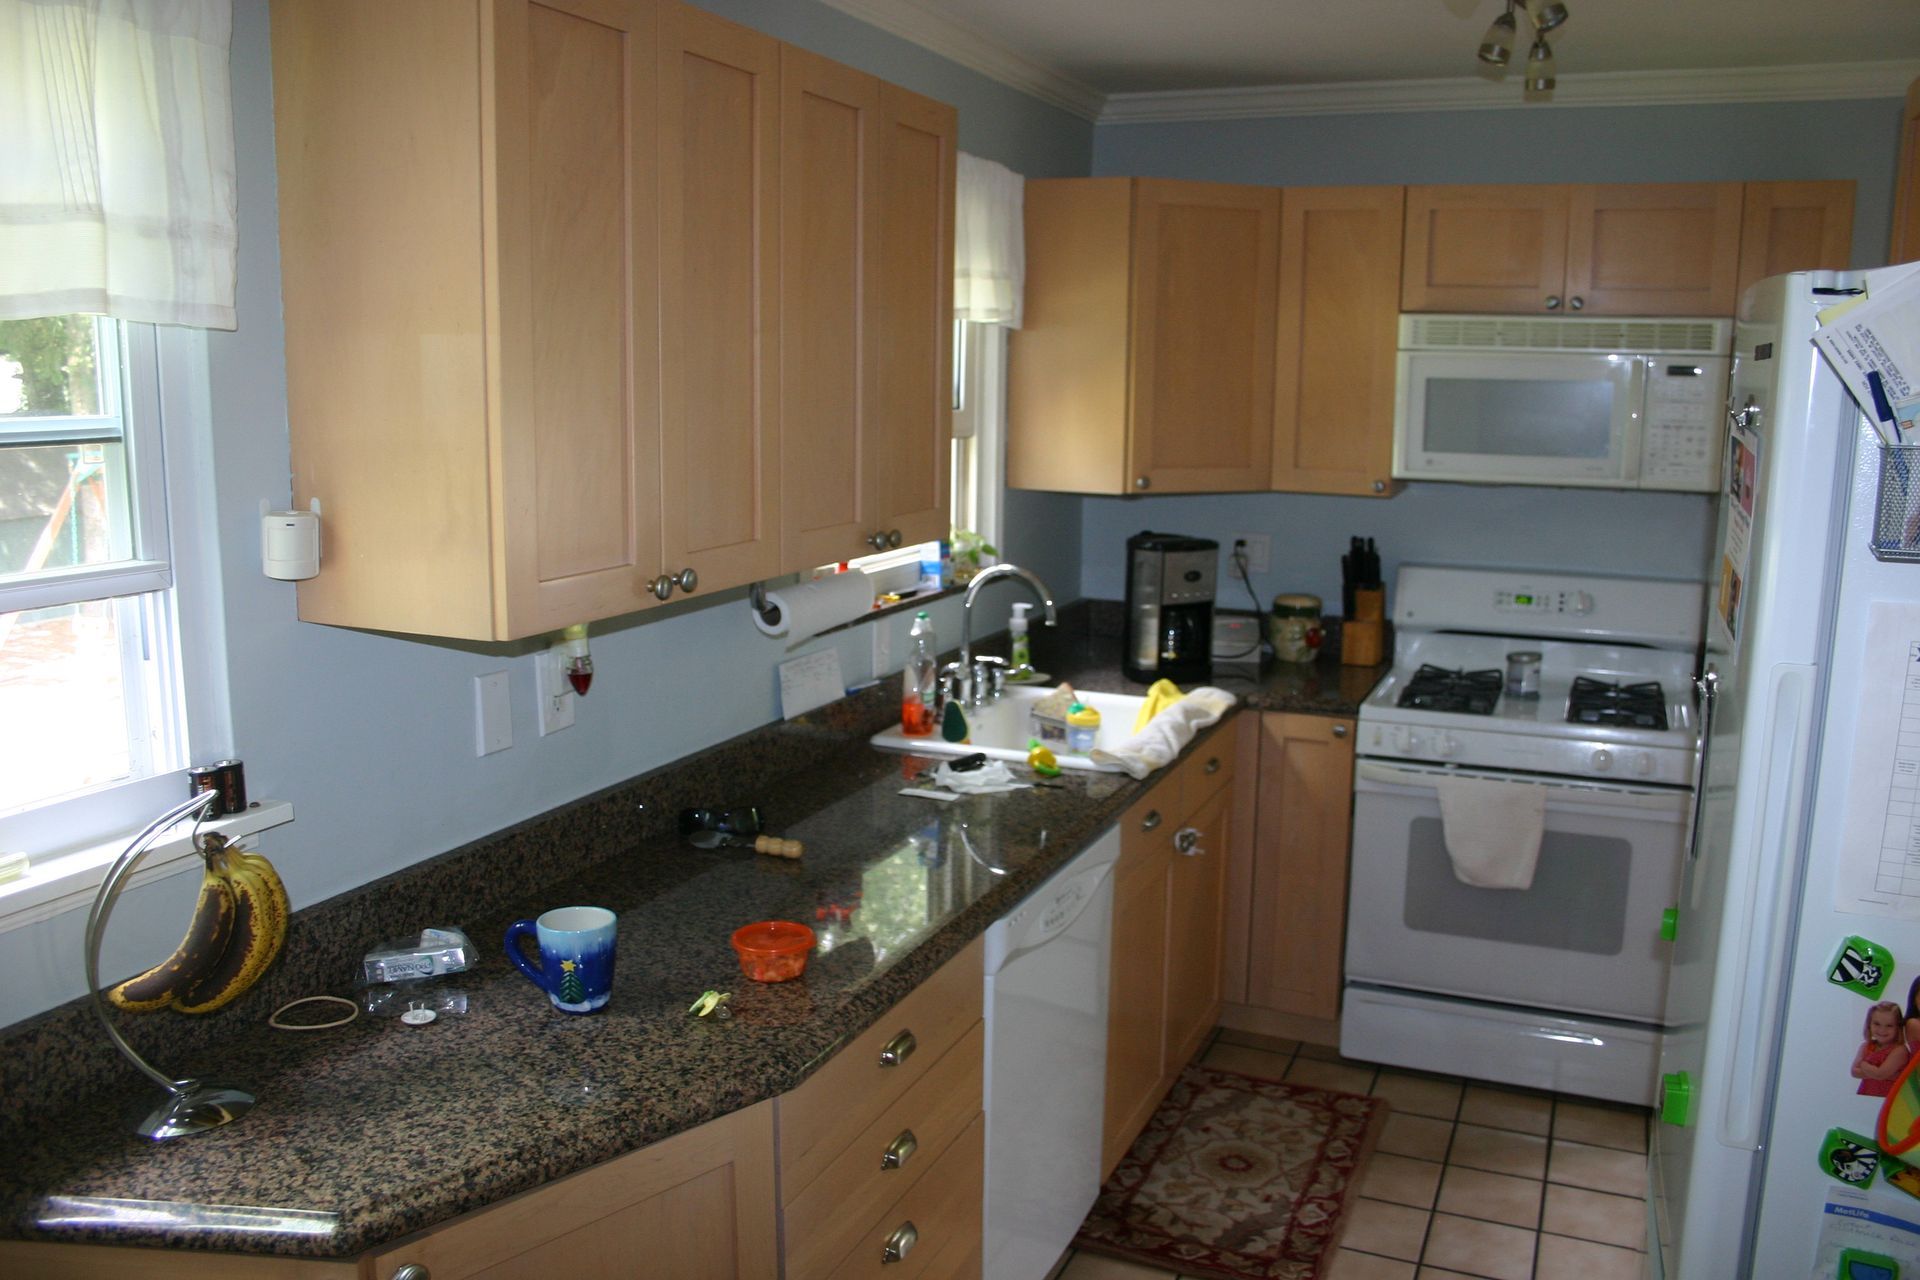 A kitchen with wooden cabinets and granite counter tops